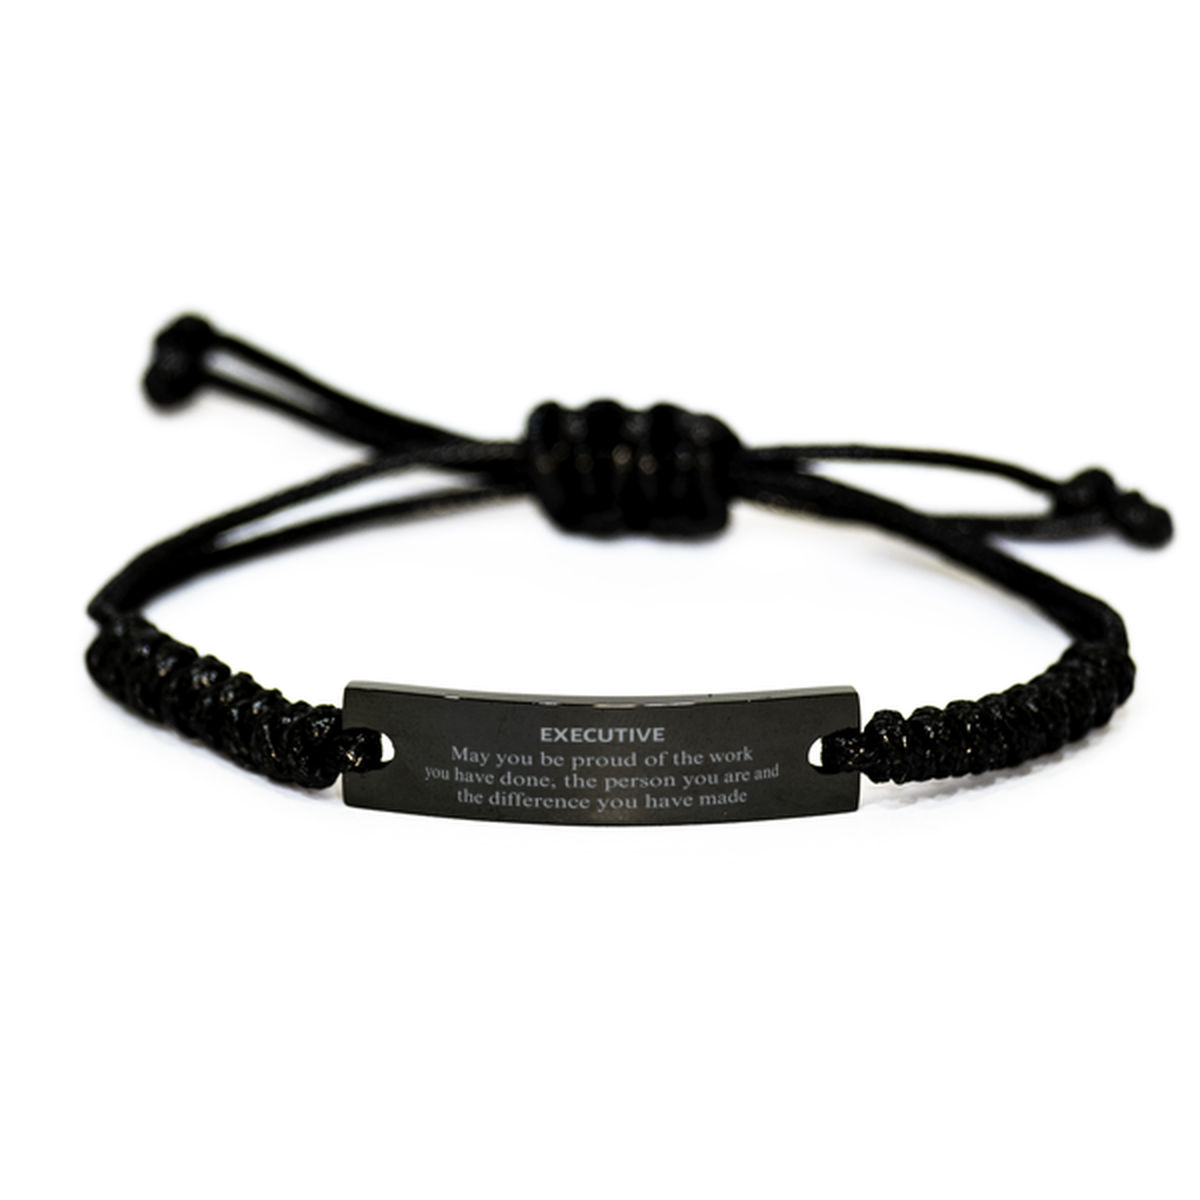 Executive May you be proud of the work you have done, Retirement Executive Black Rope Bracelet for Colleague Appreciation Gifts Amazing for Executive